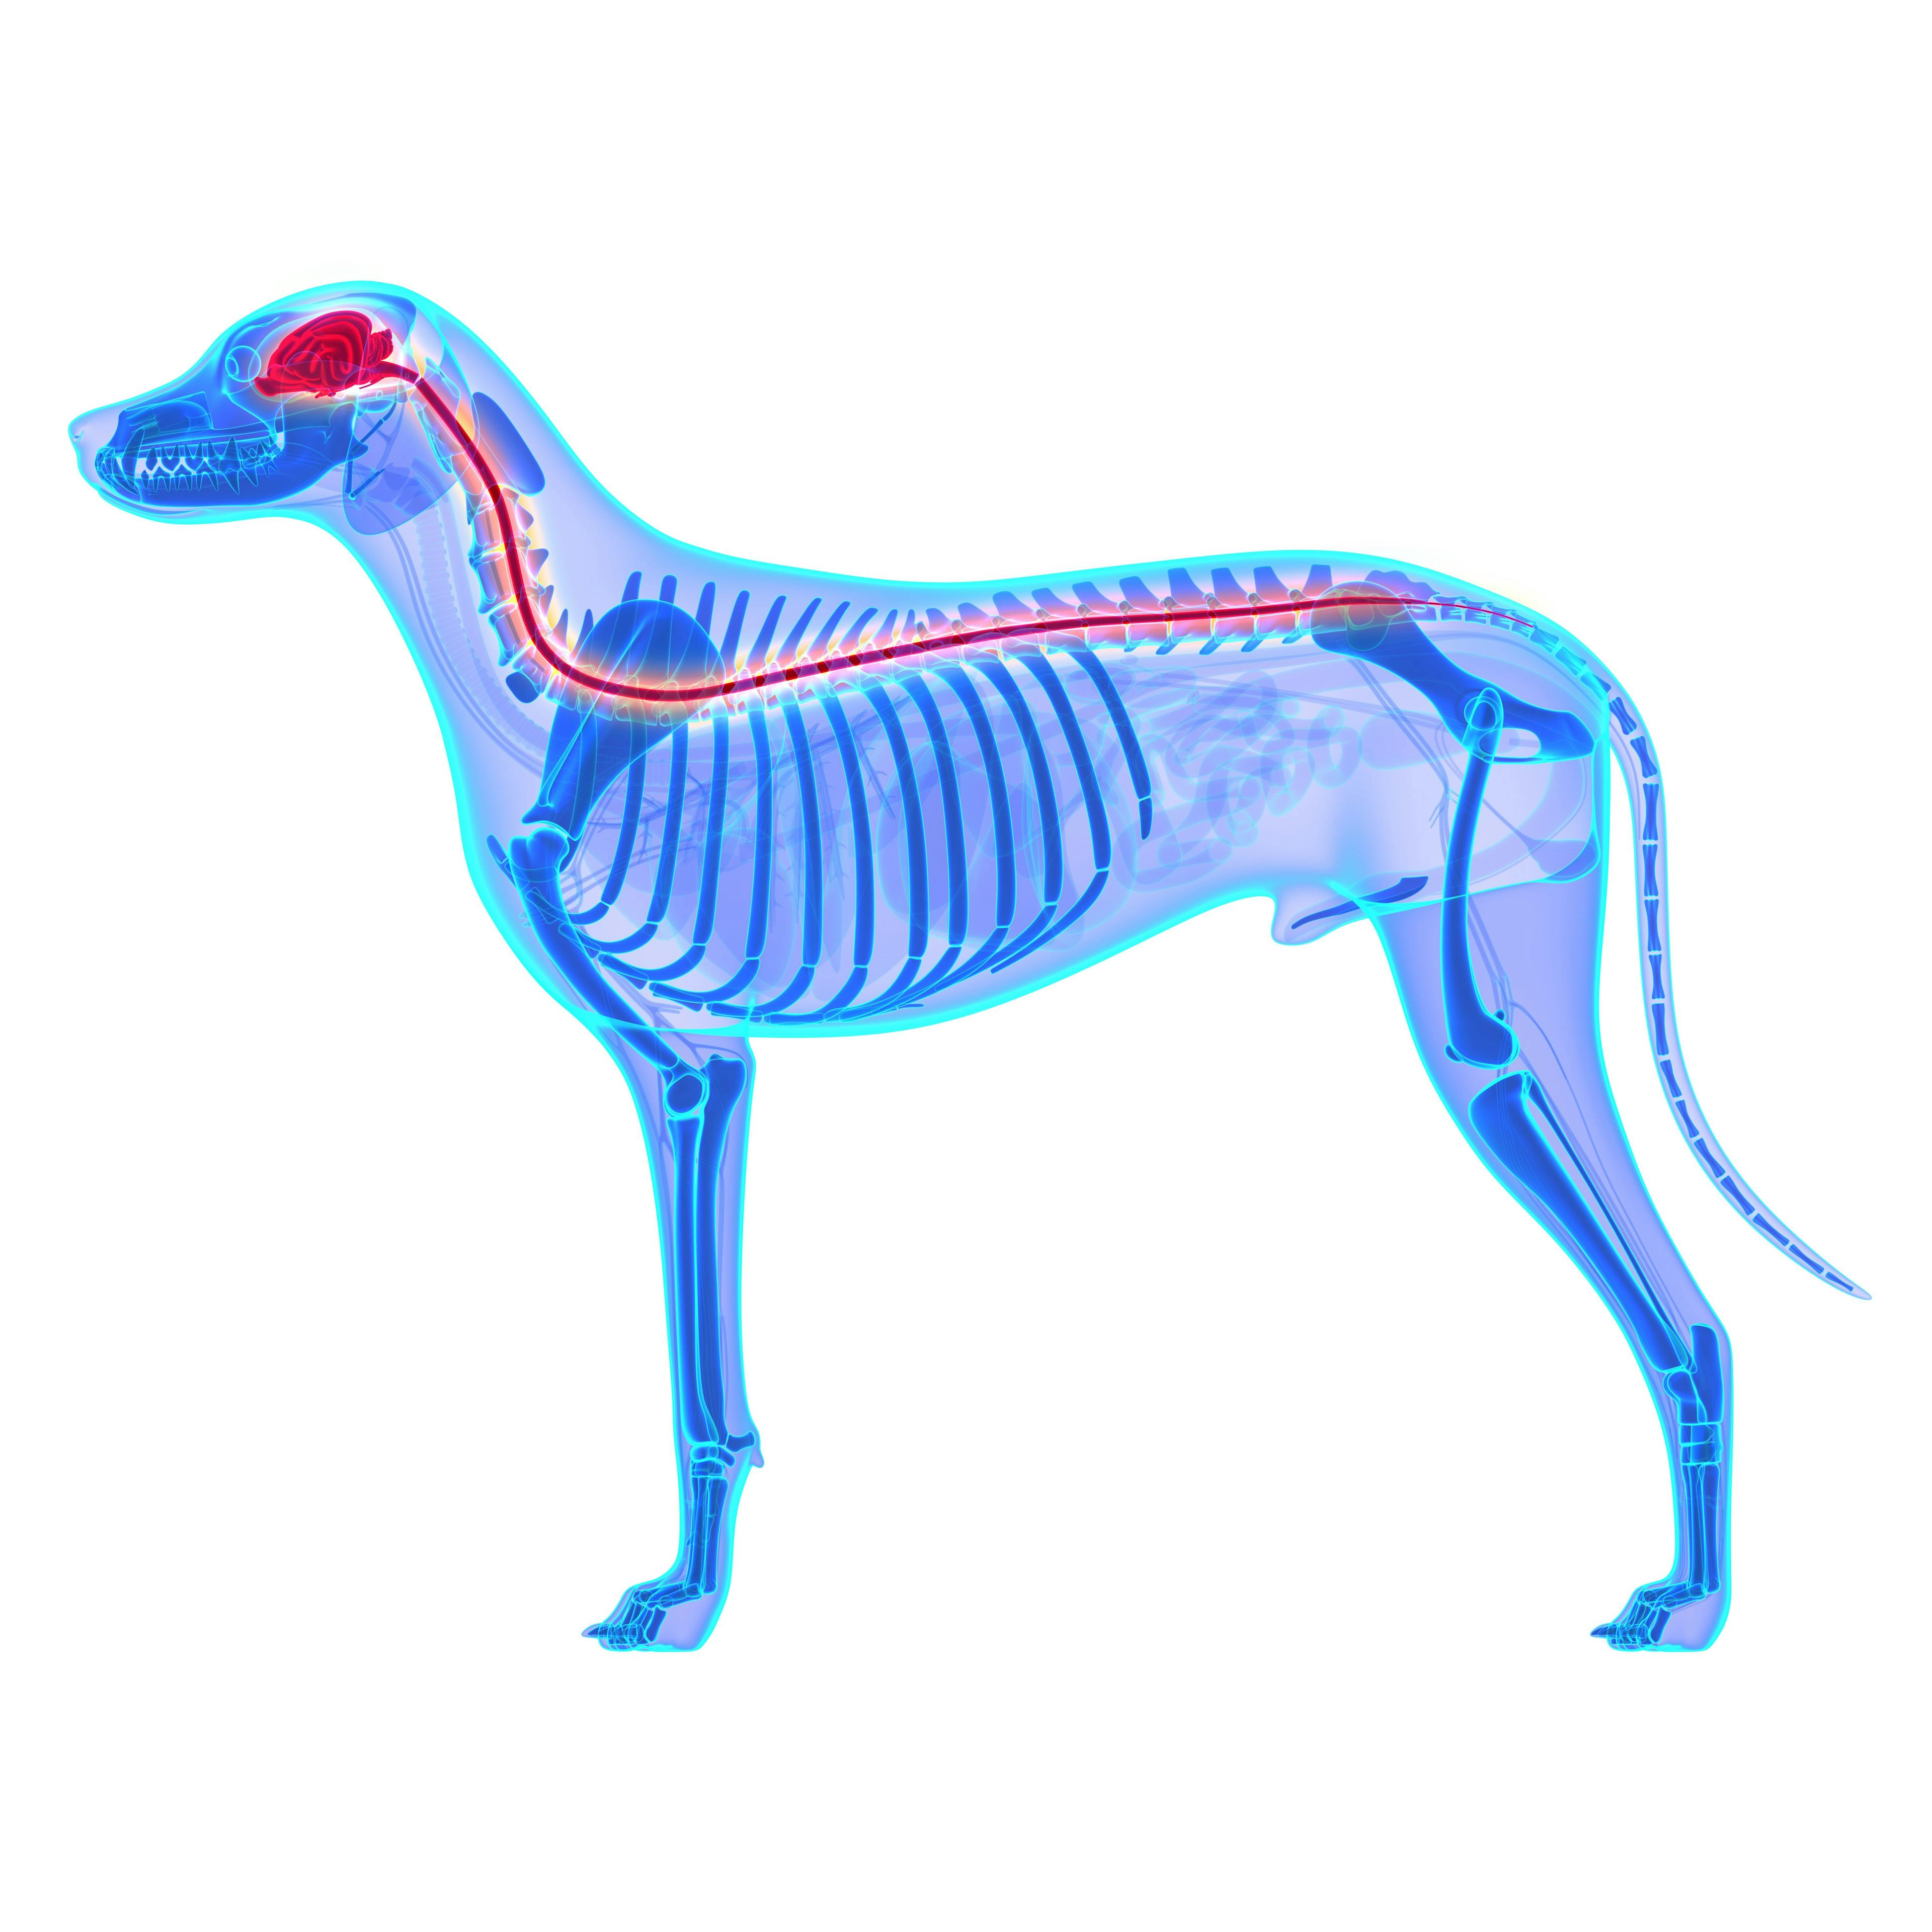 Common canine spinal disease simplified 